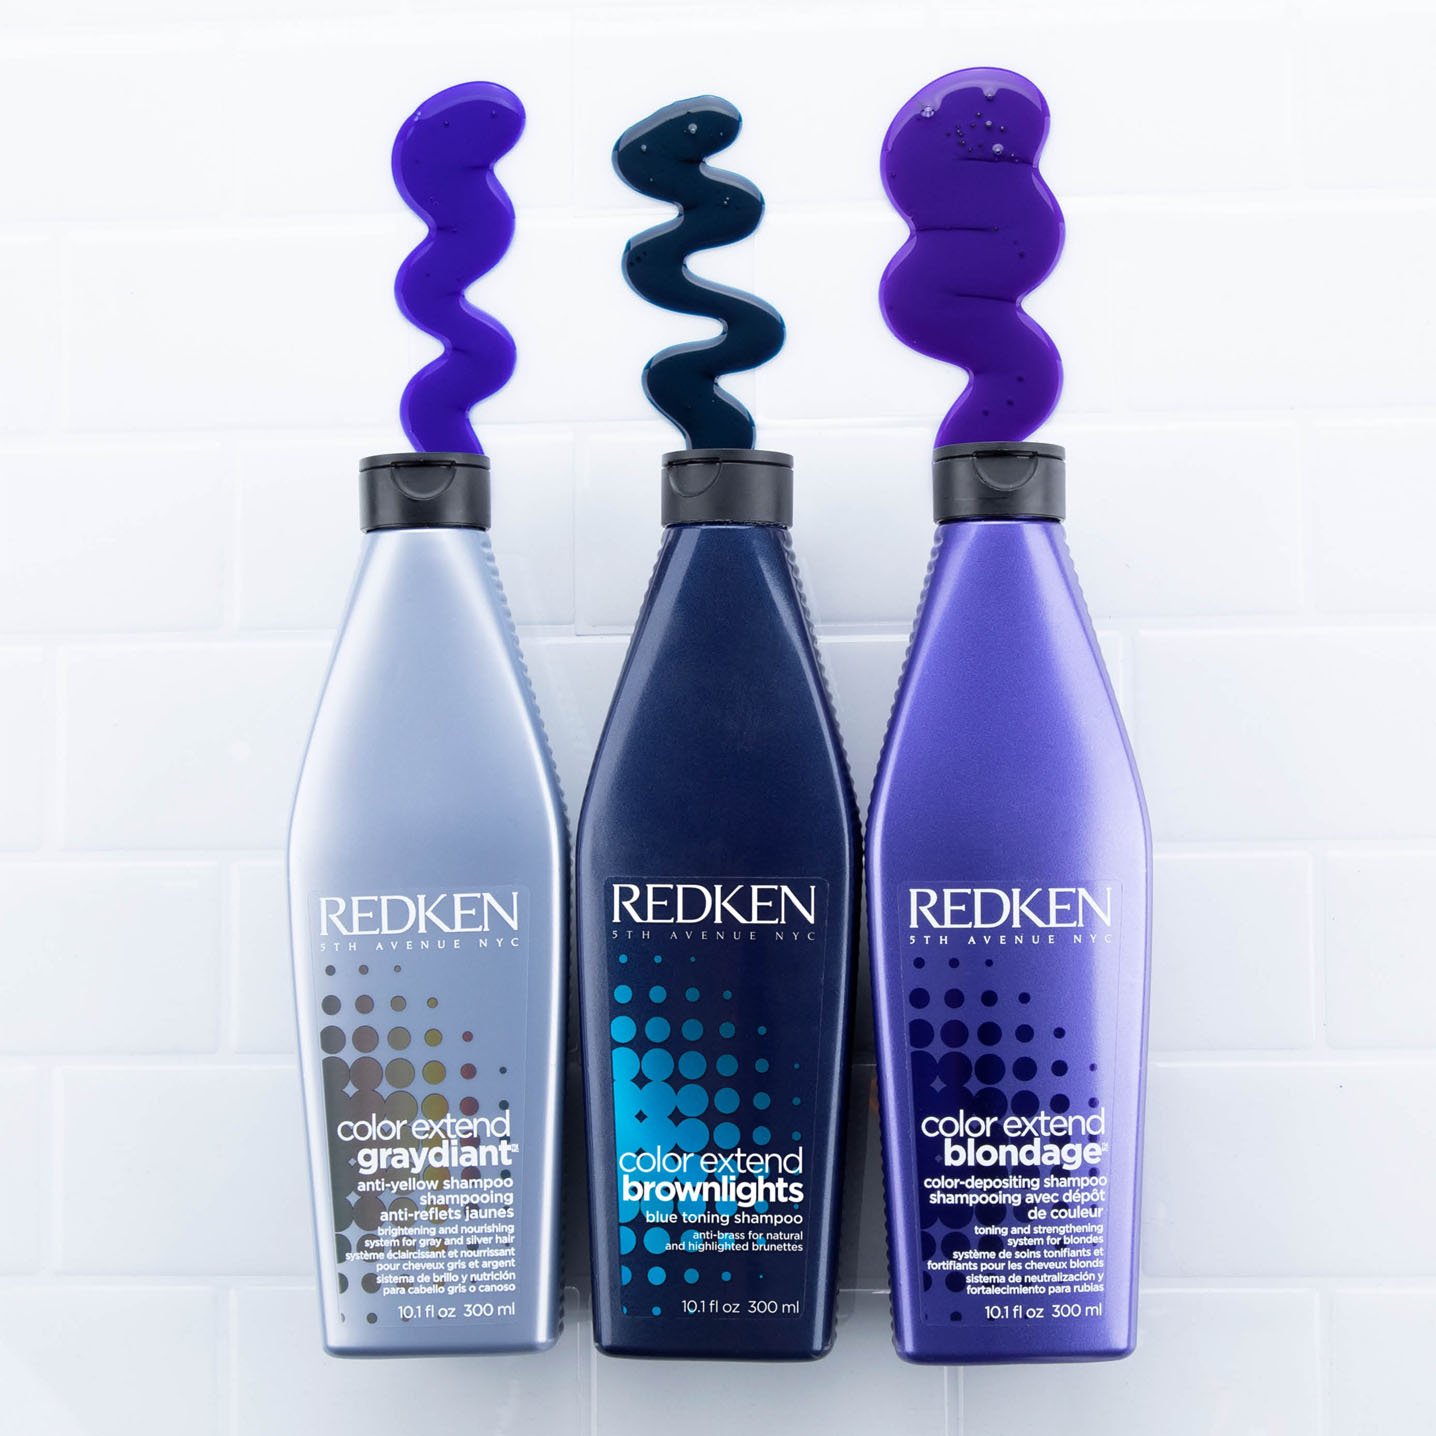 what the difference between shampoo, purple and silver shampoo?